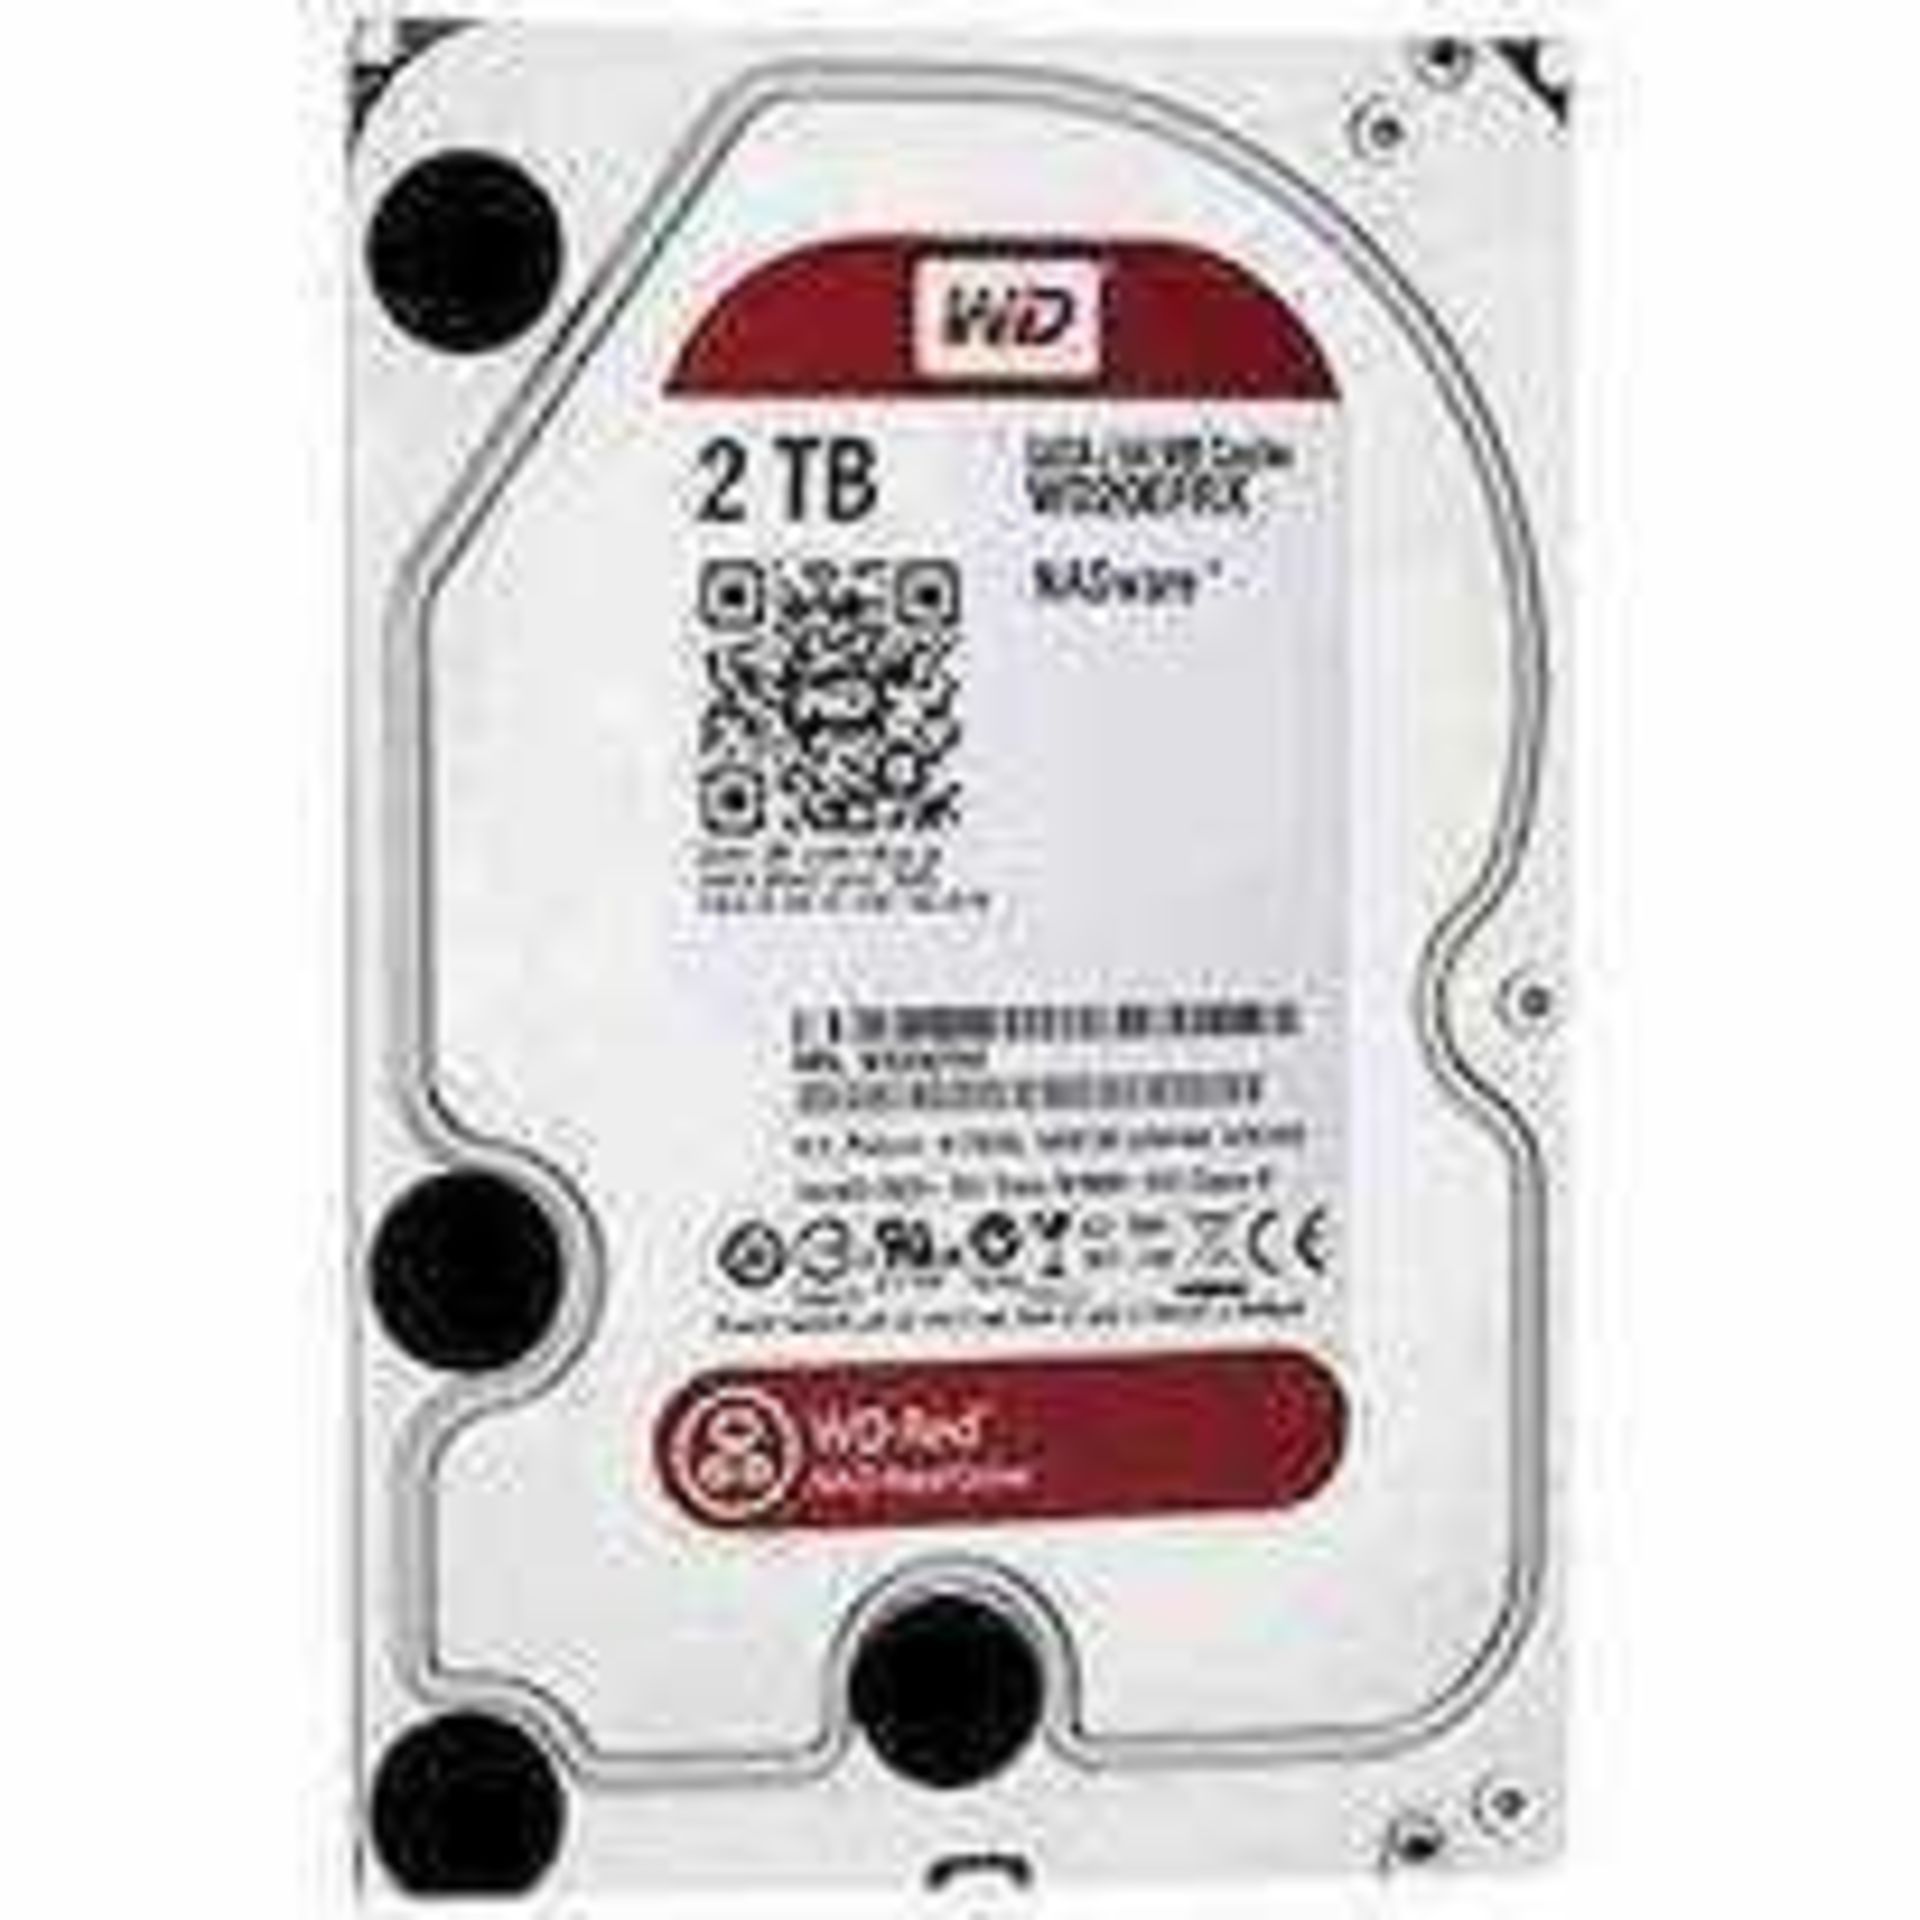 RRP £110 Bagged Wd 2.0 Tb Nas Wear Red Hard Drive (Appraisals Available On Request) (Pictures For